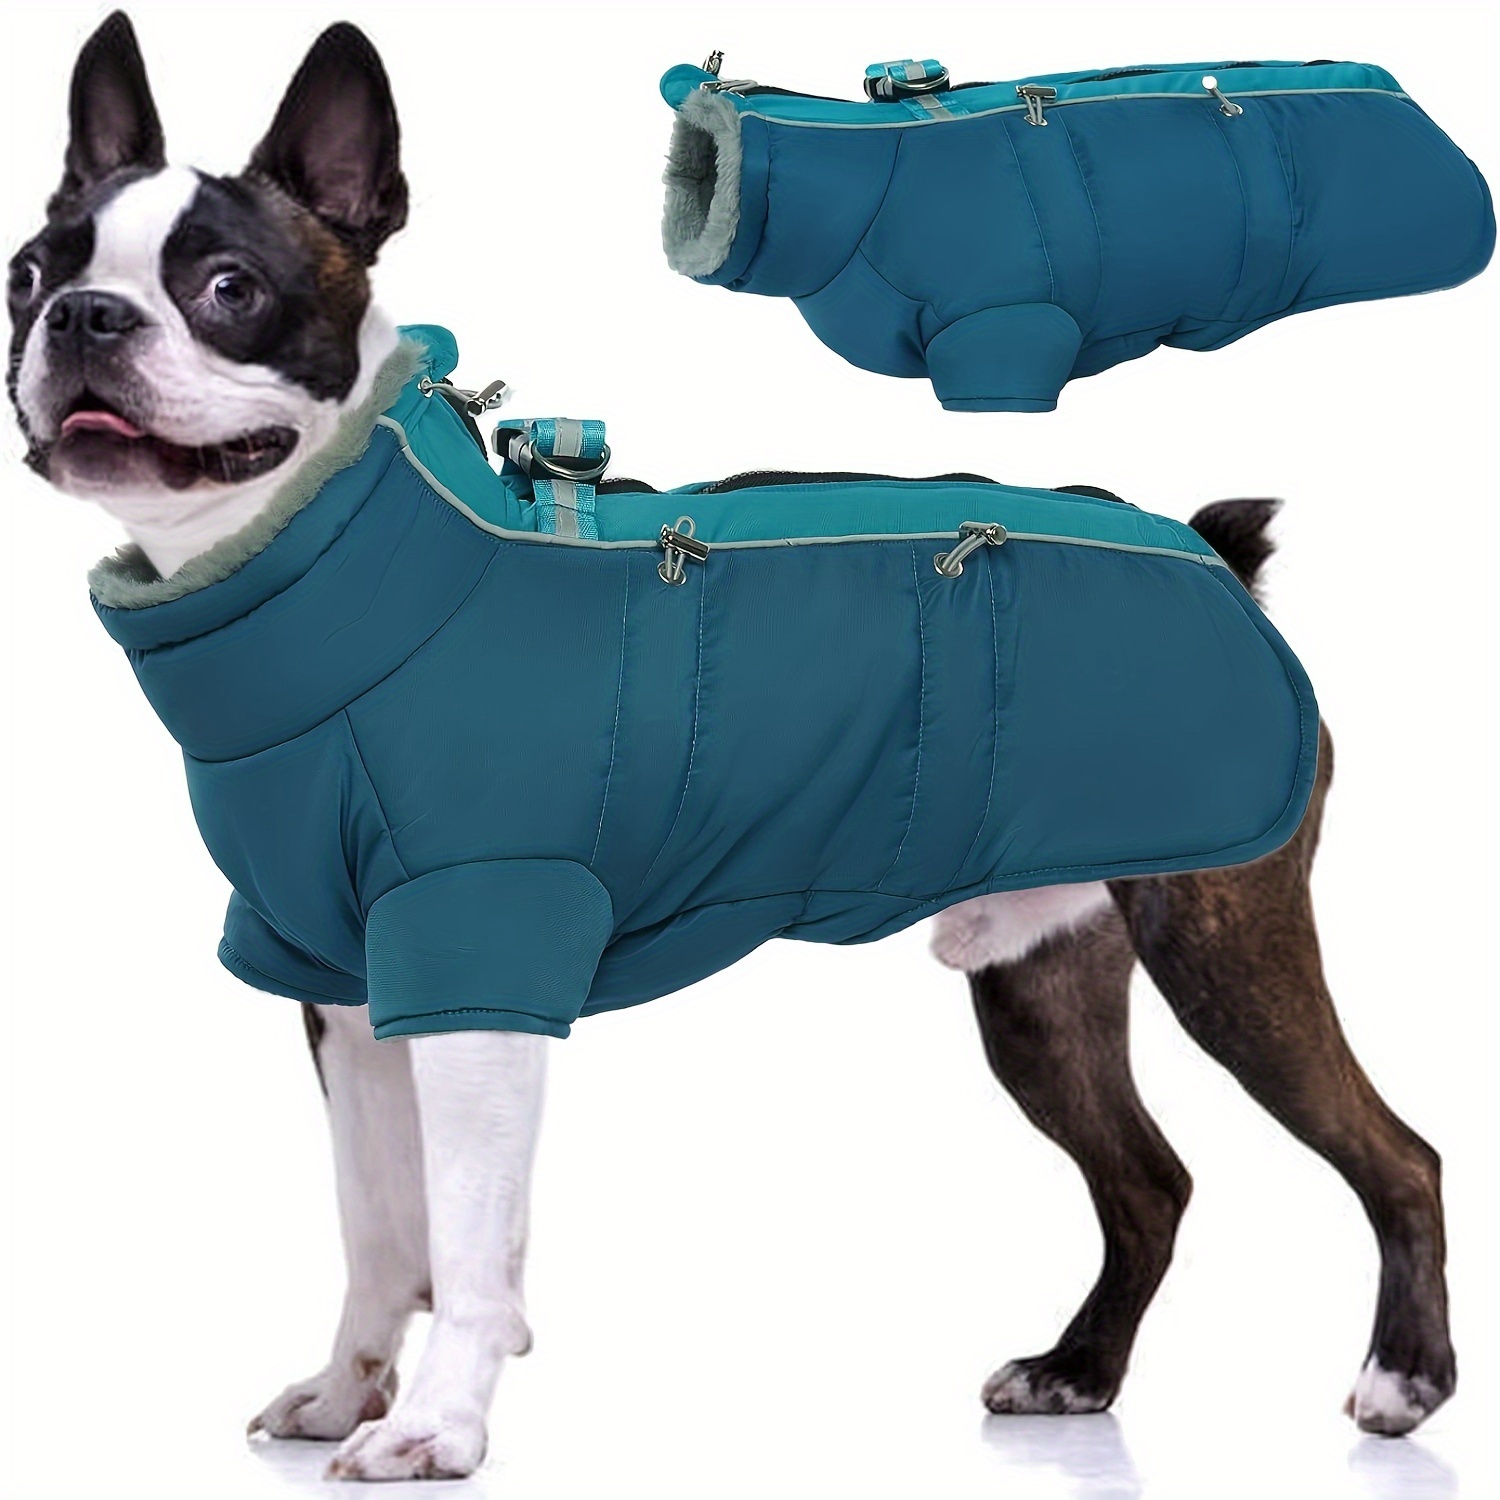 

Warm Dog Coats With Harness, Waterproof Dog Jacket For Small Medium Large Dogs, Fleece Lined Dog Winter Snowsuit Coat, High Collar Dog Winter Jacket Vest Clothes For Cold Weather, Turquoise